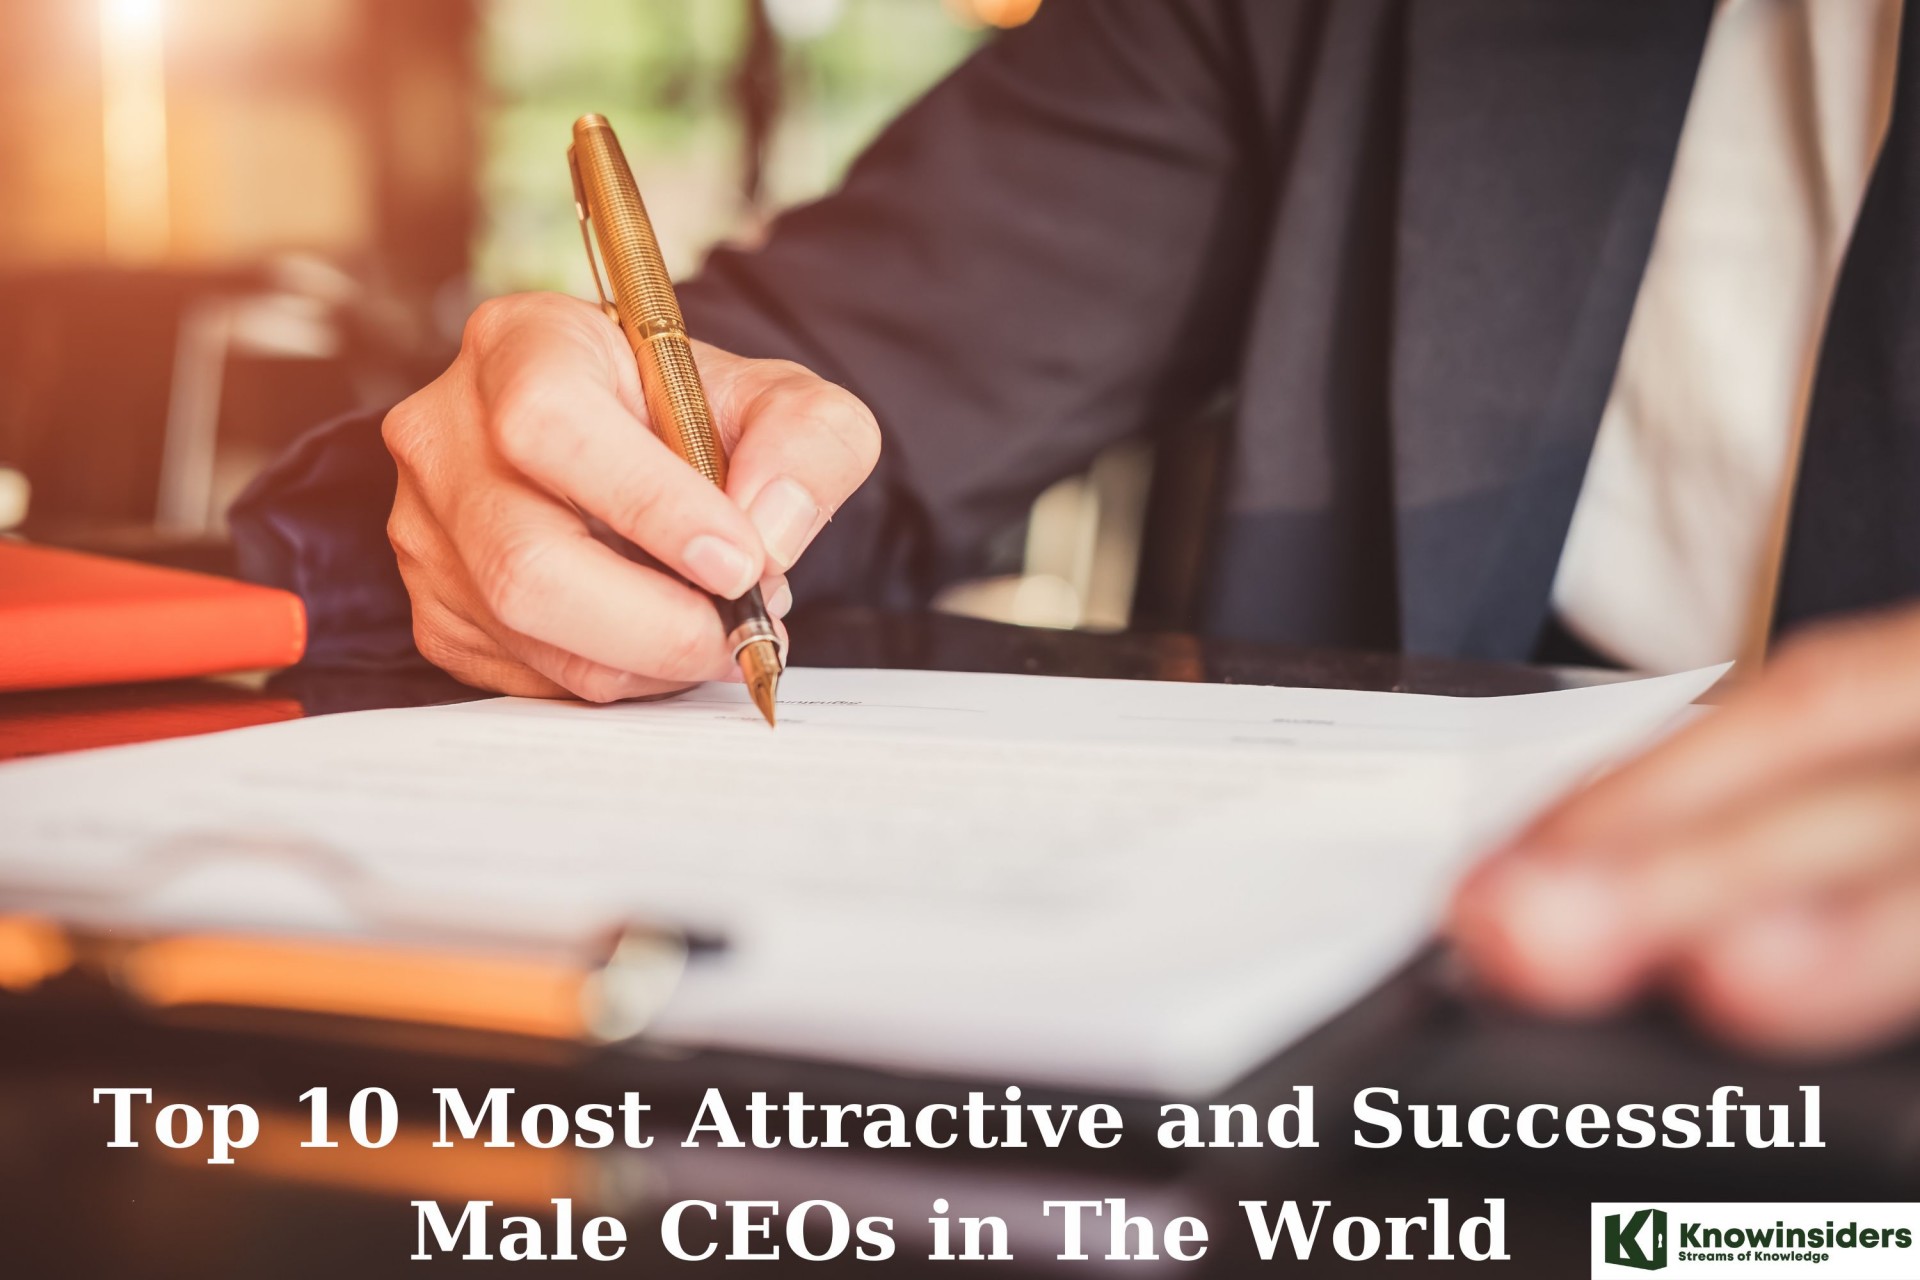 Top 10 Most Attractive and Successful Male CEOs in The World